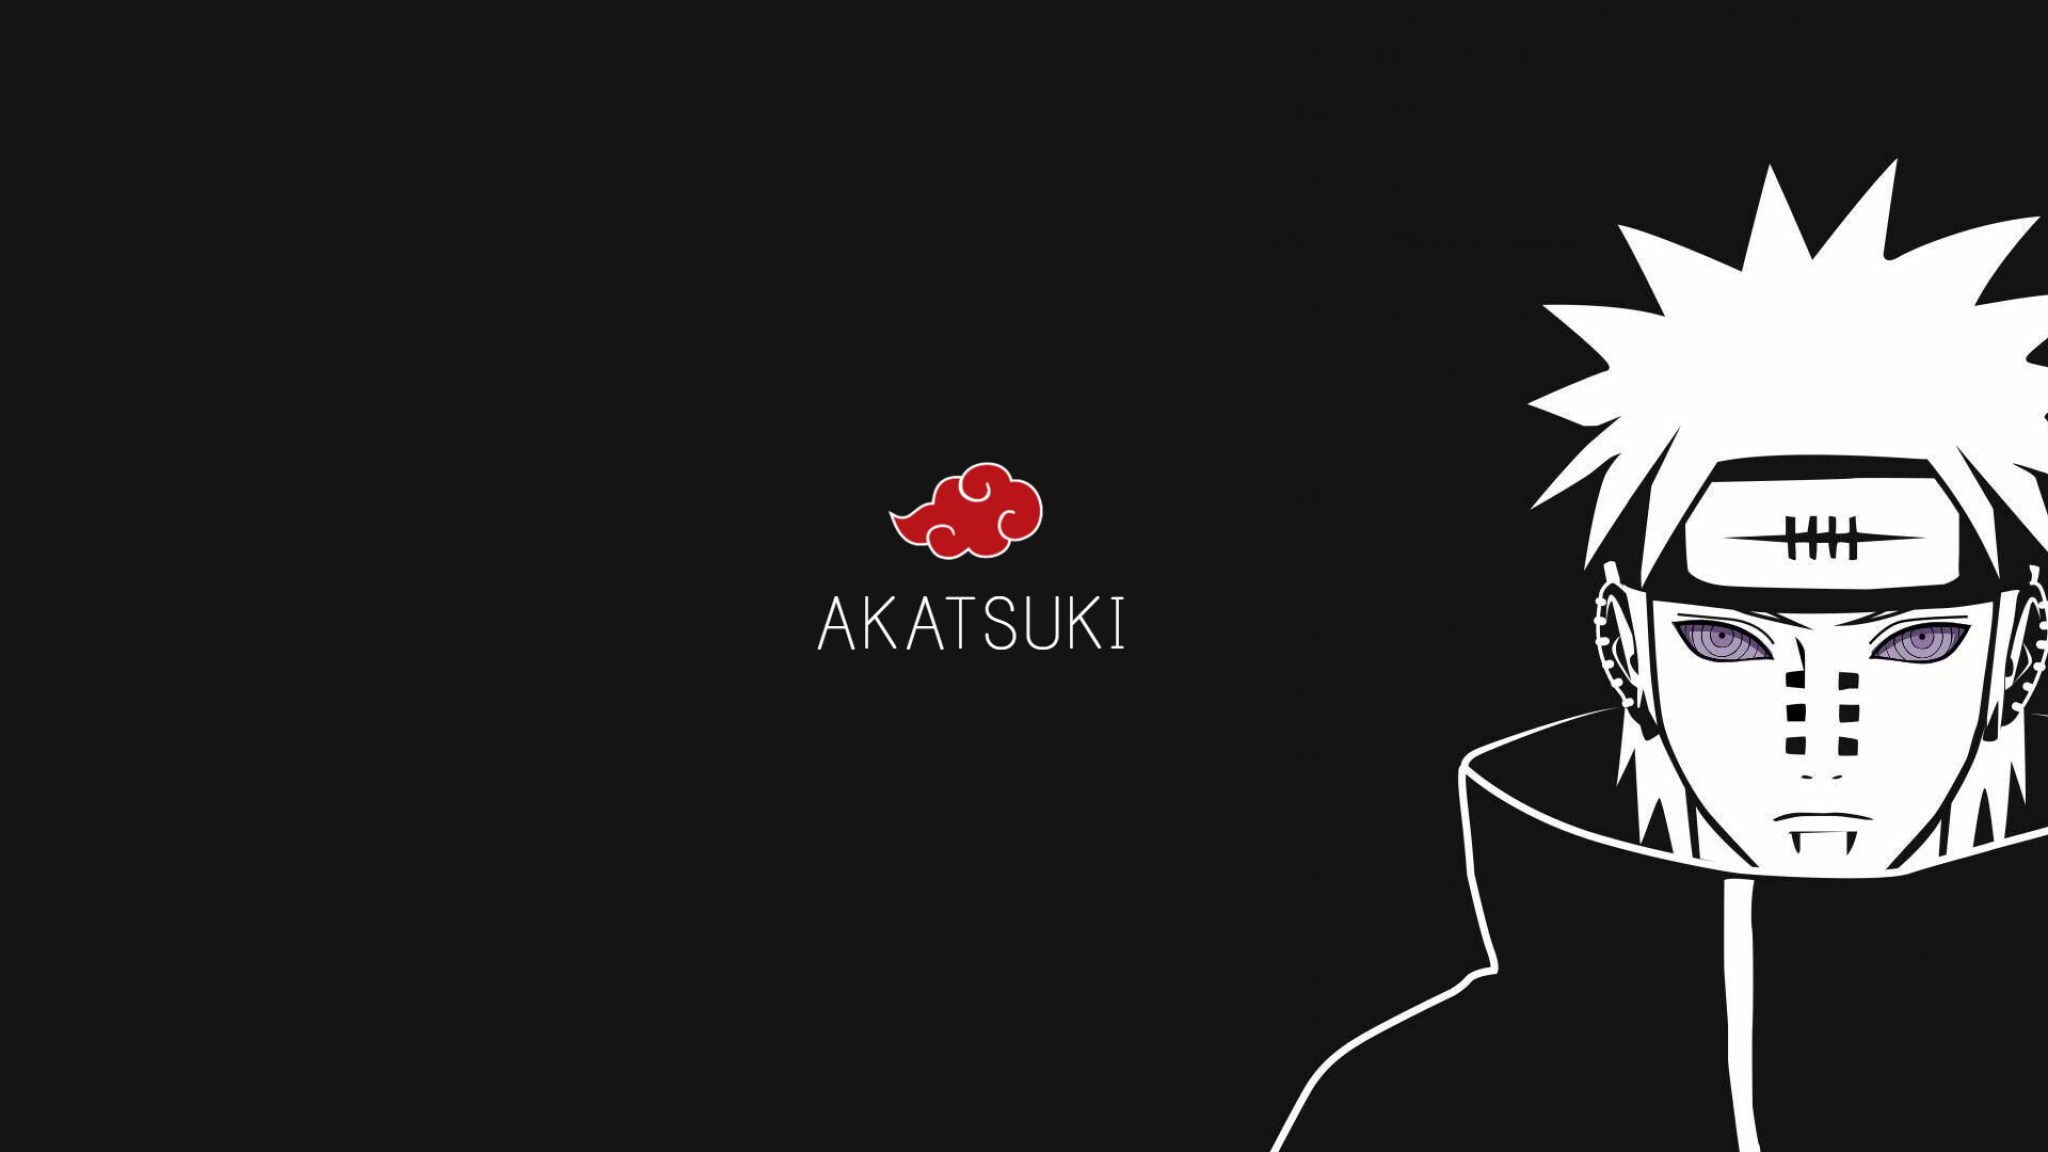 48x1152 Akatsuki Naruto 48x1152 Resolution Wallpaper Hd Anime 4k Wallpapers Images Photos And Background Wallpapers Den